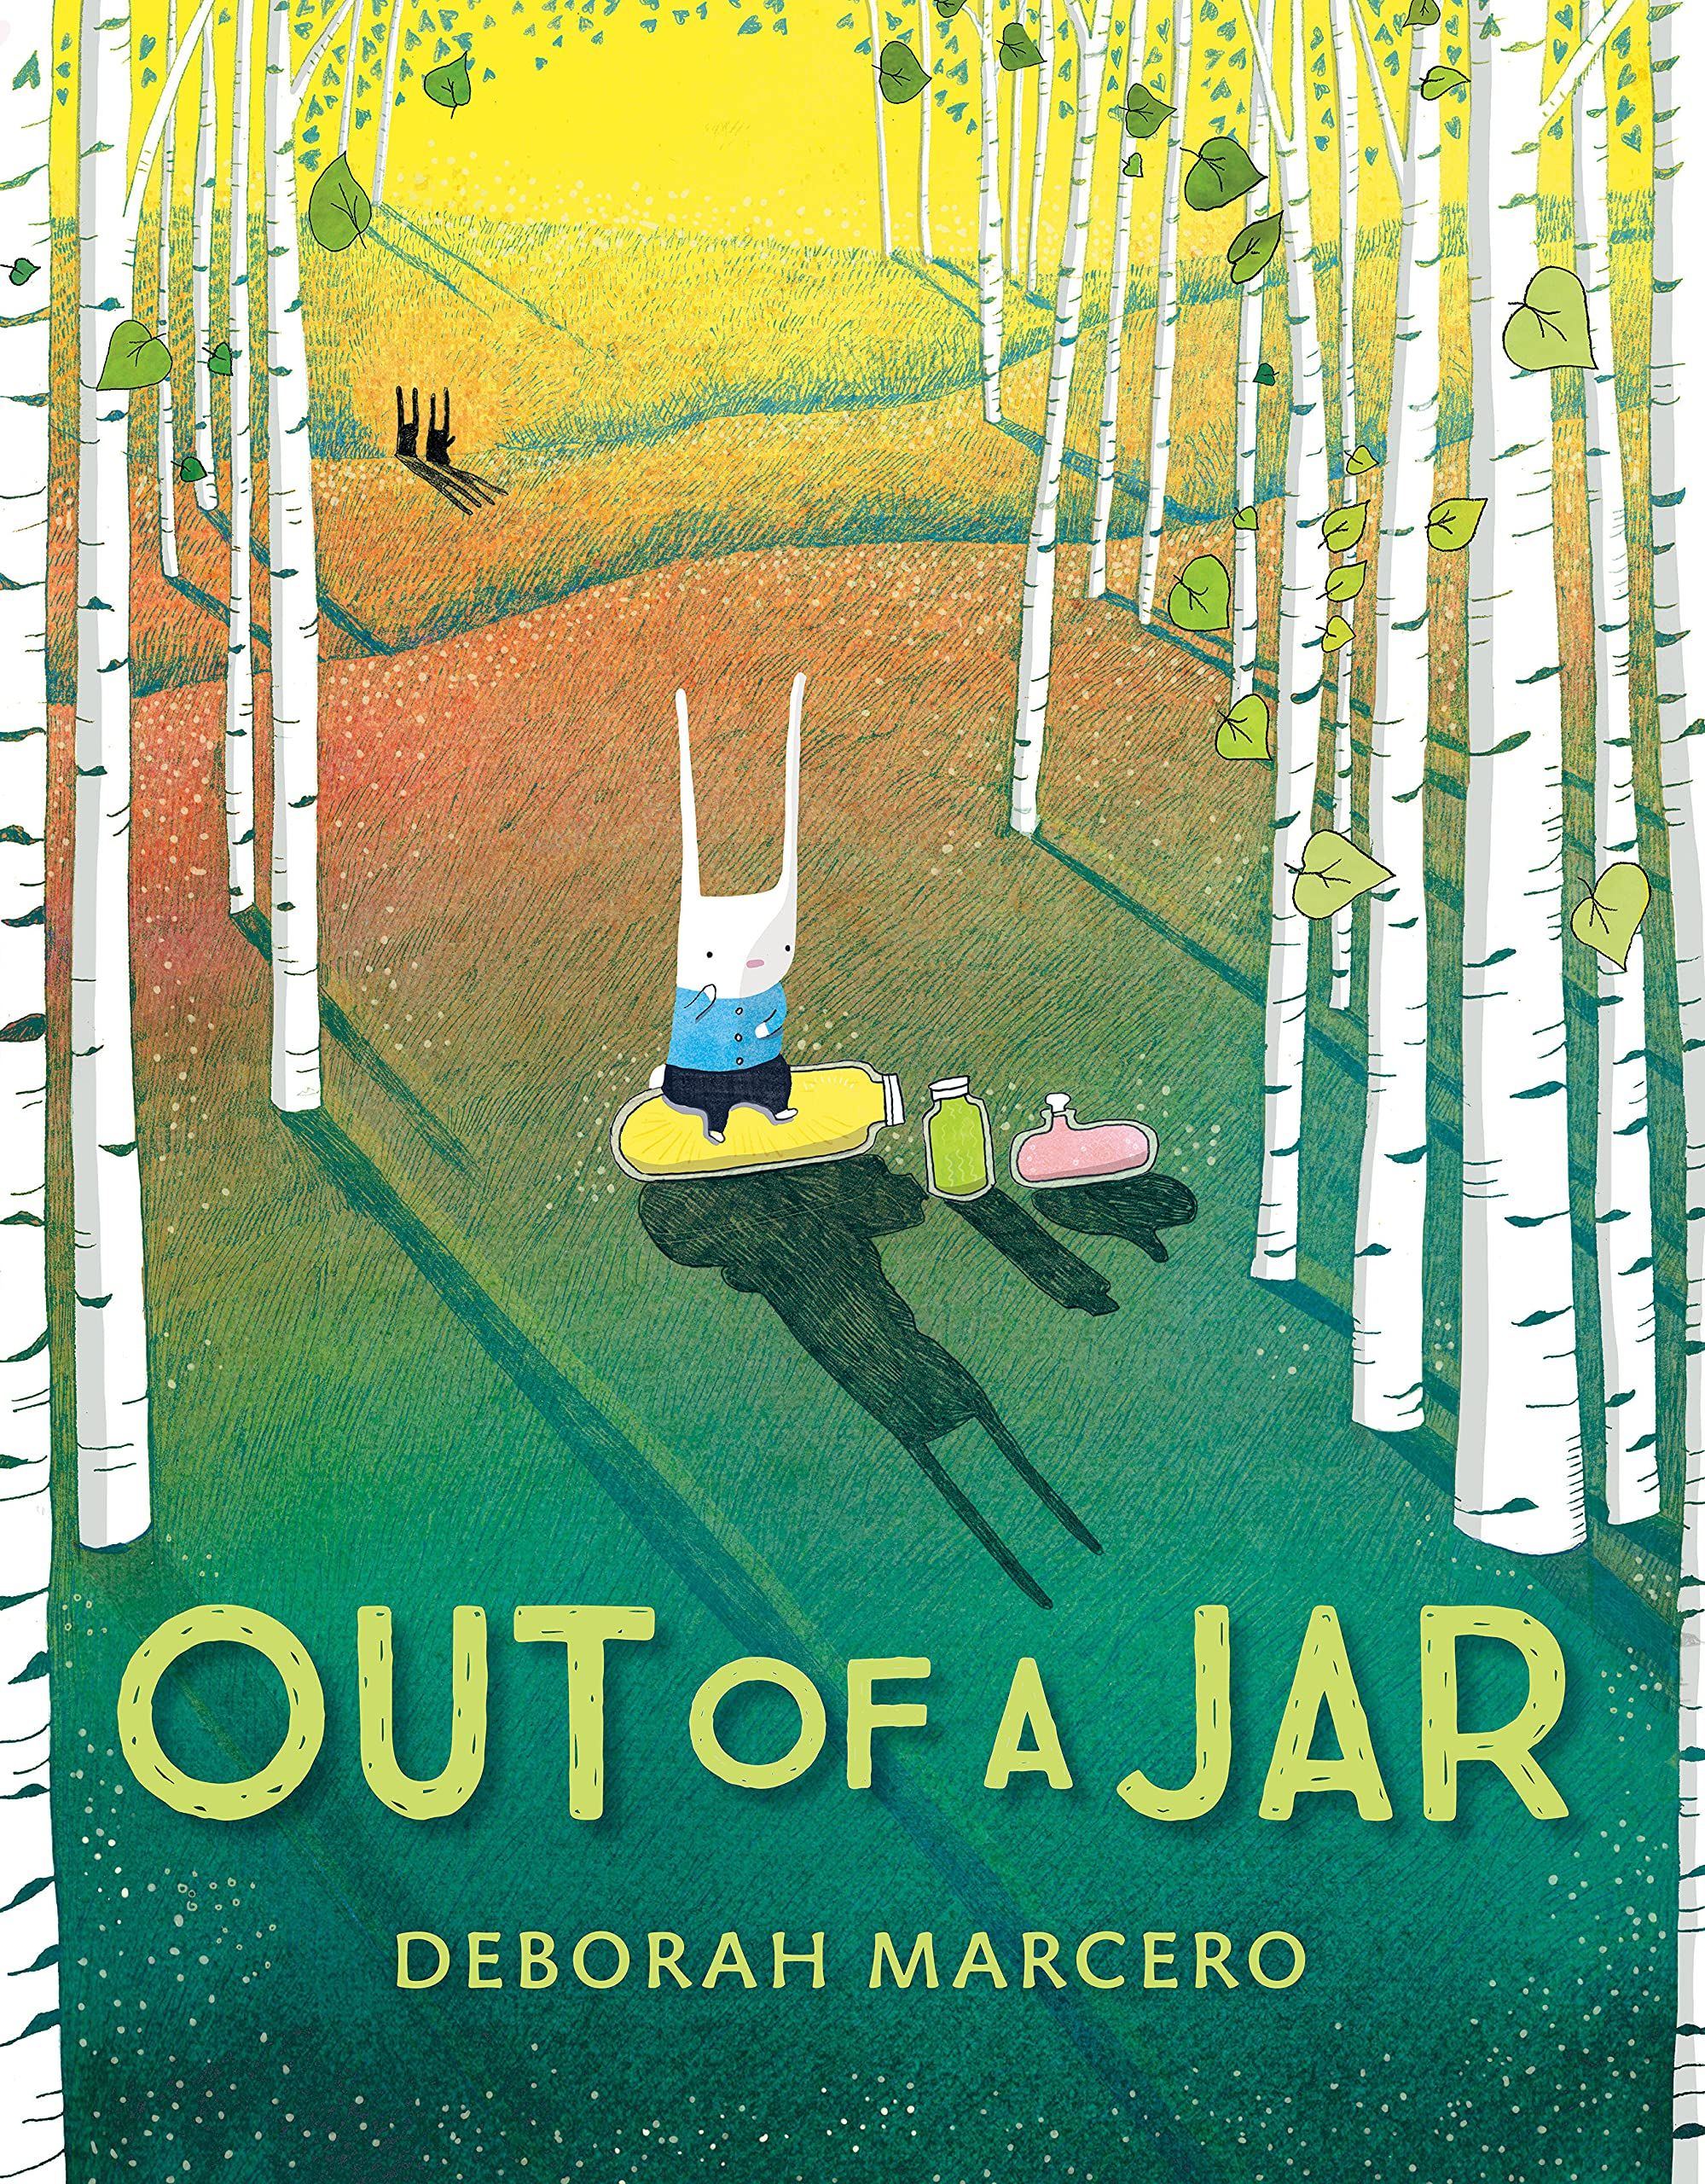 Cover of Out of a Jar by Marcero